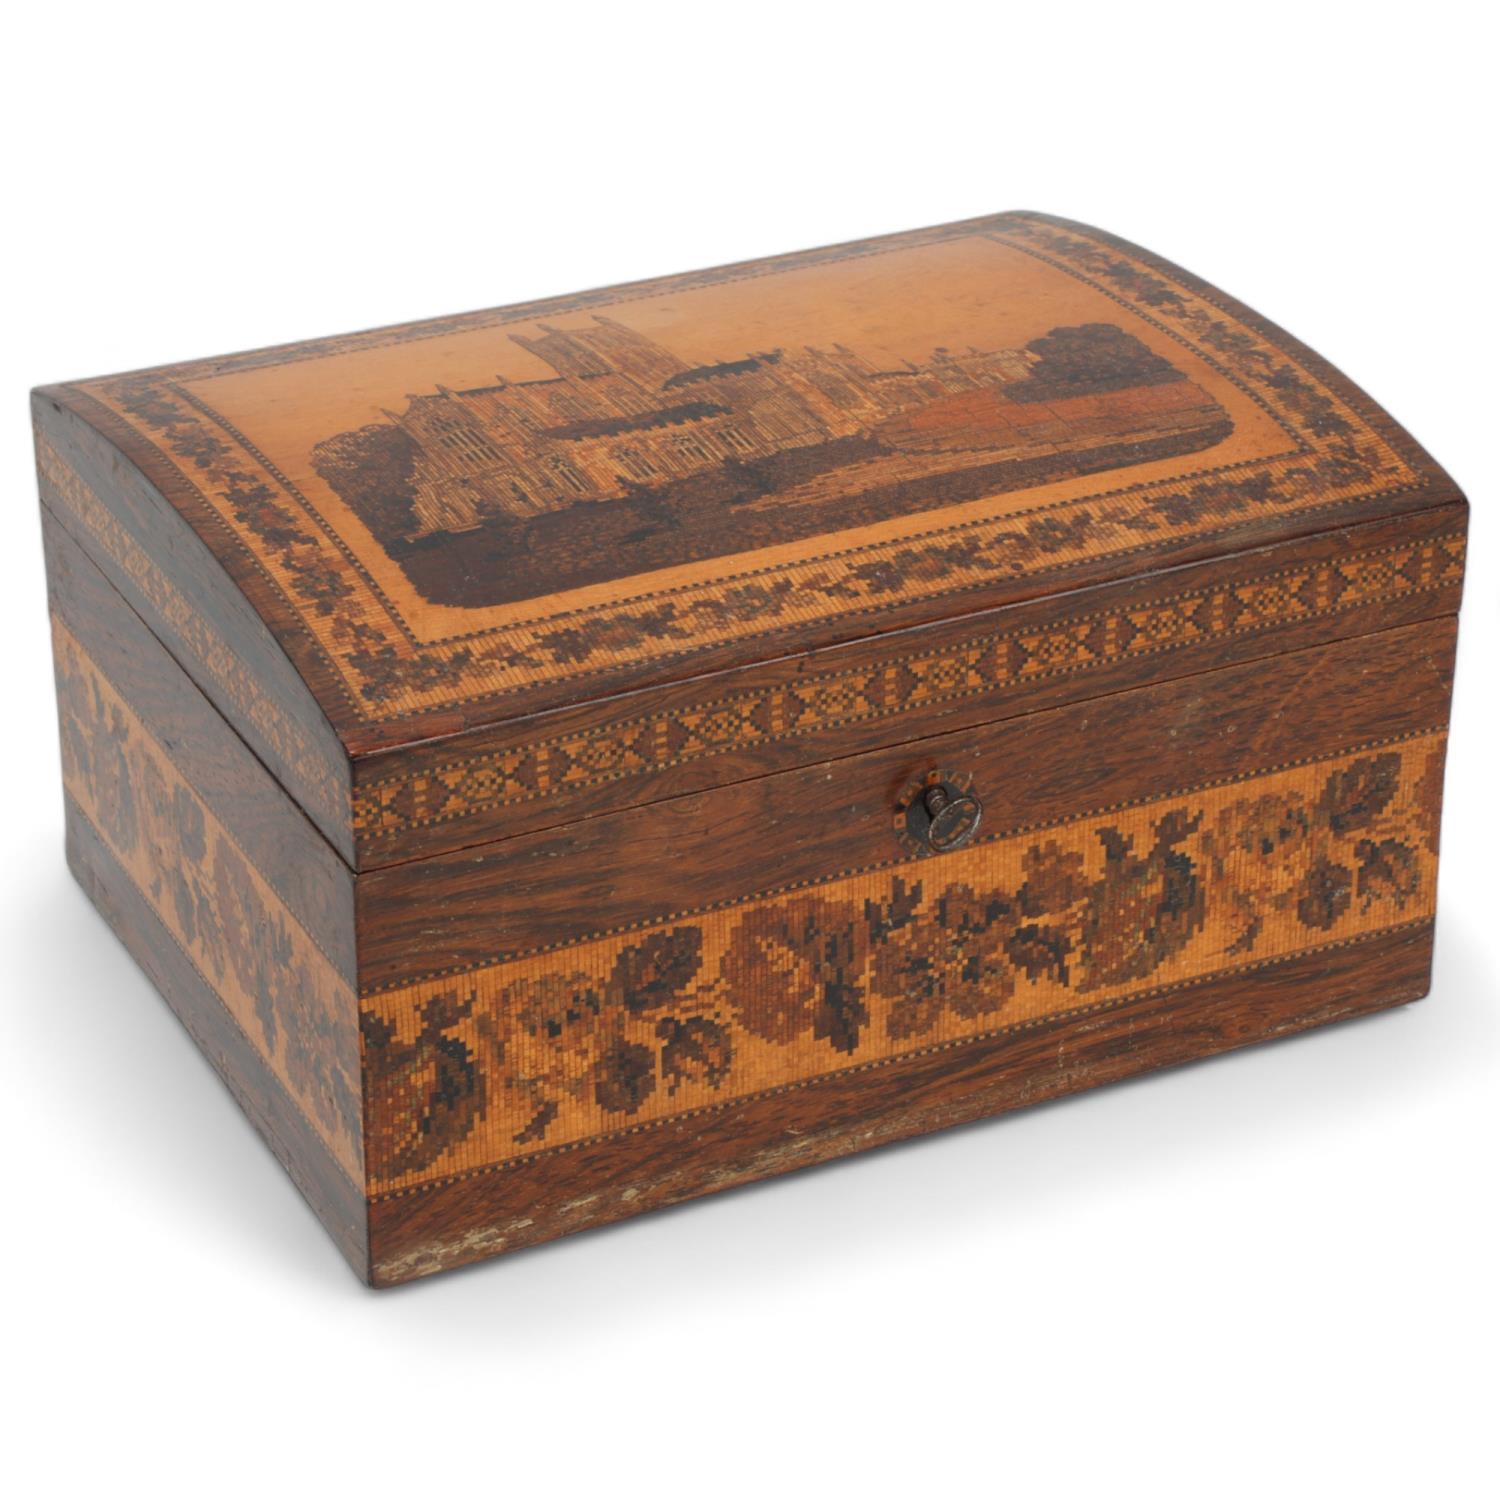 Tunbridge Ware, 19th century rosewood and micro-mosaic dome-top stationery box, pictorial lid